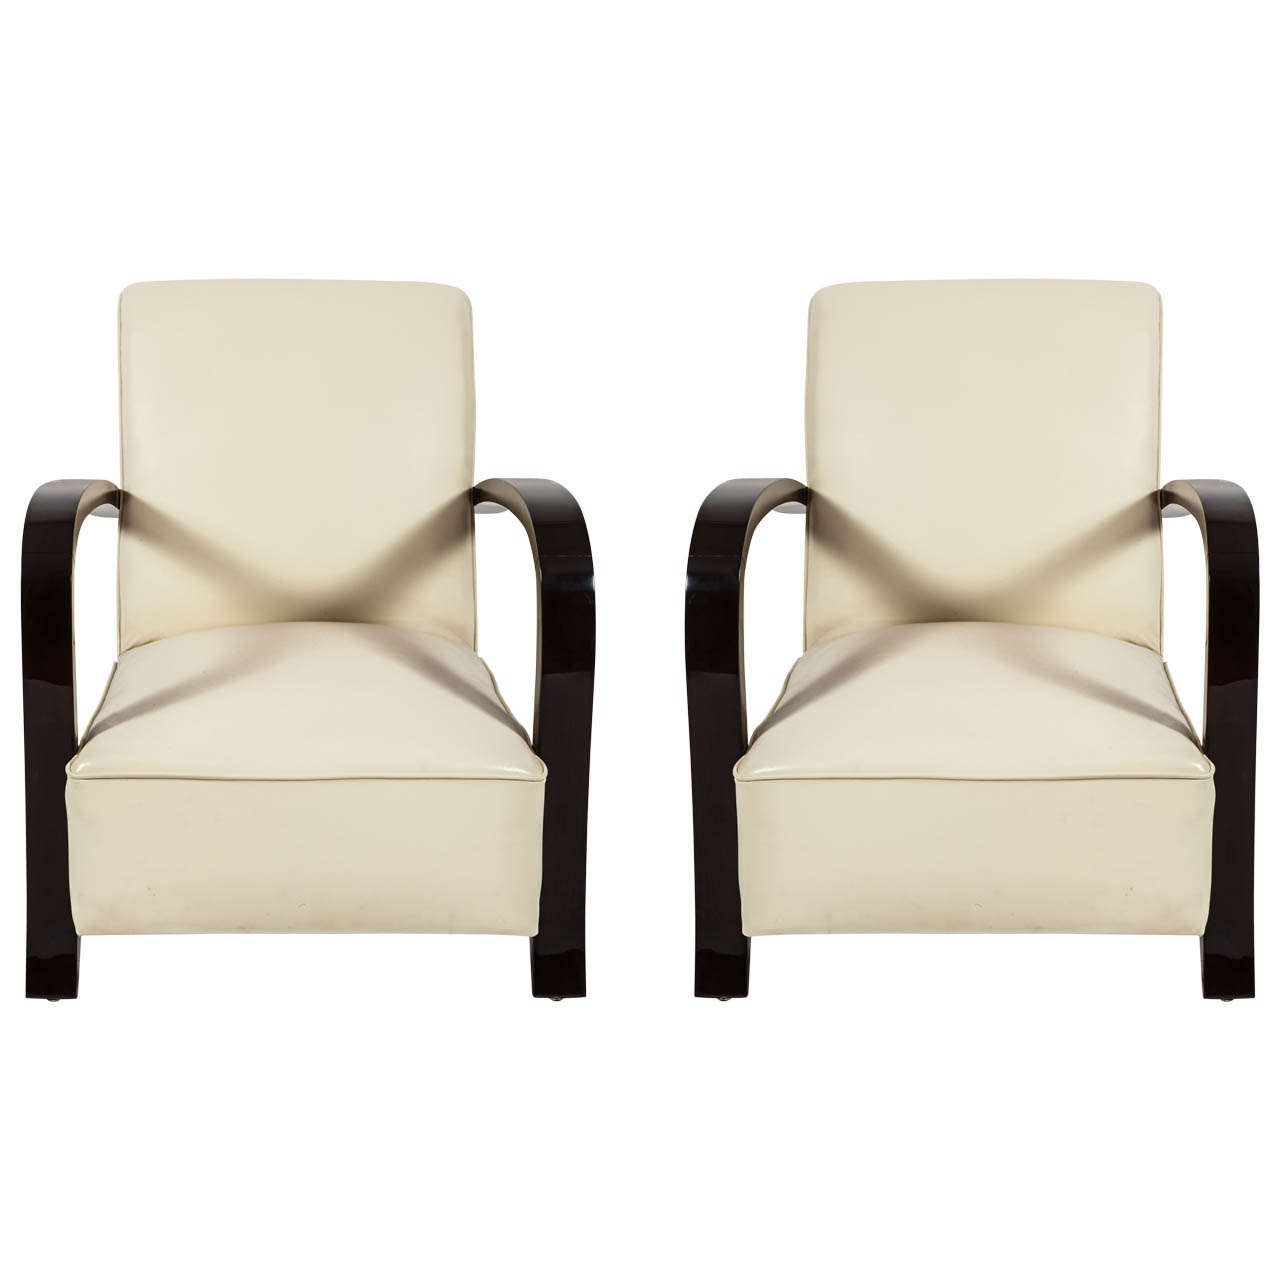 1930s Art Deco Armchairs For Sale